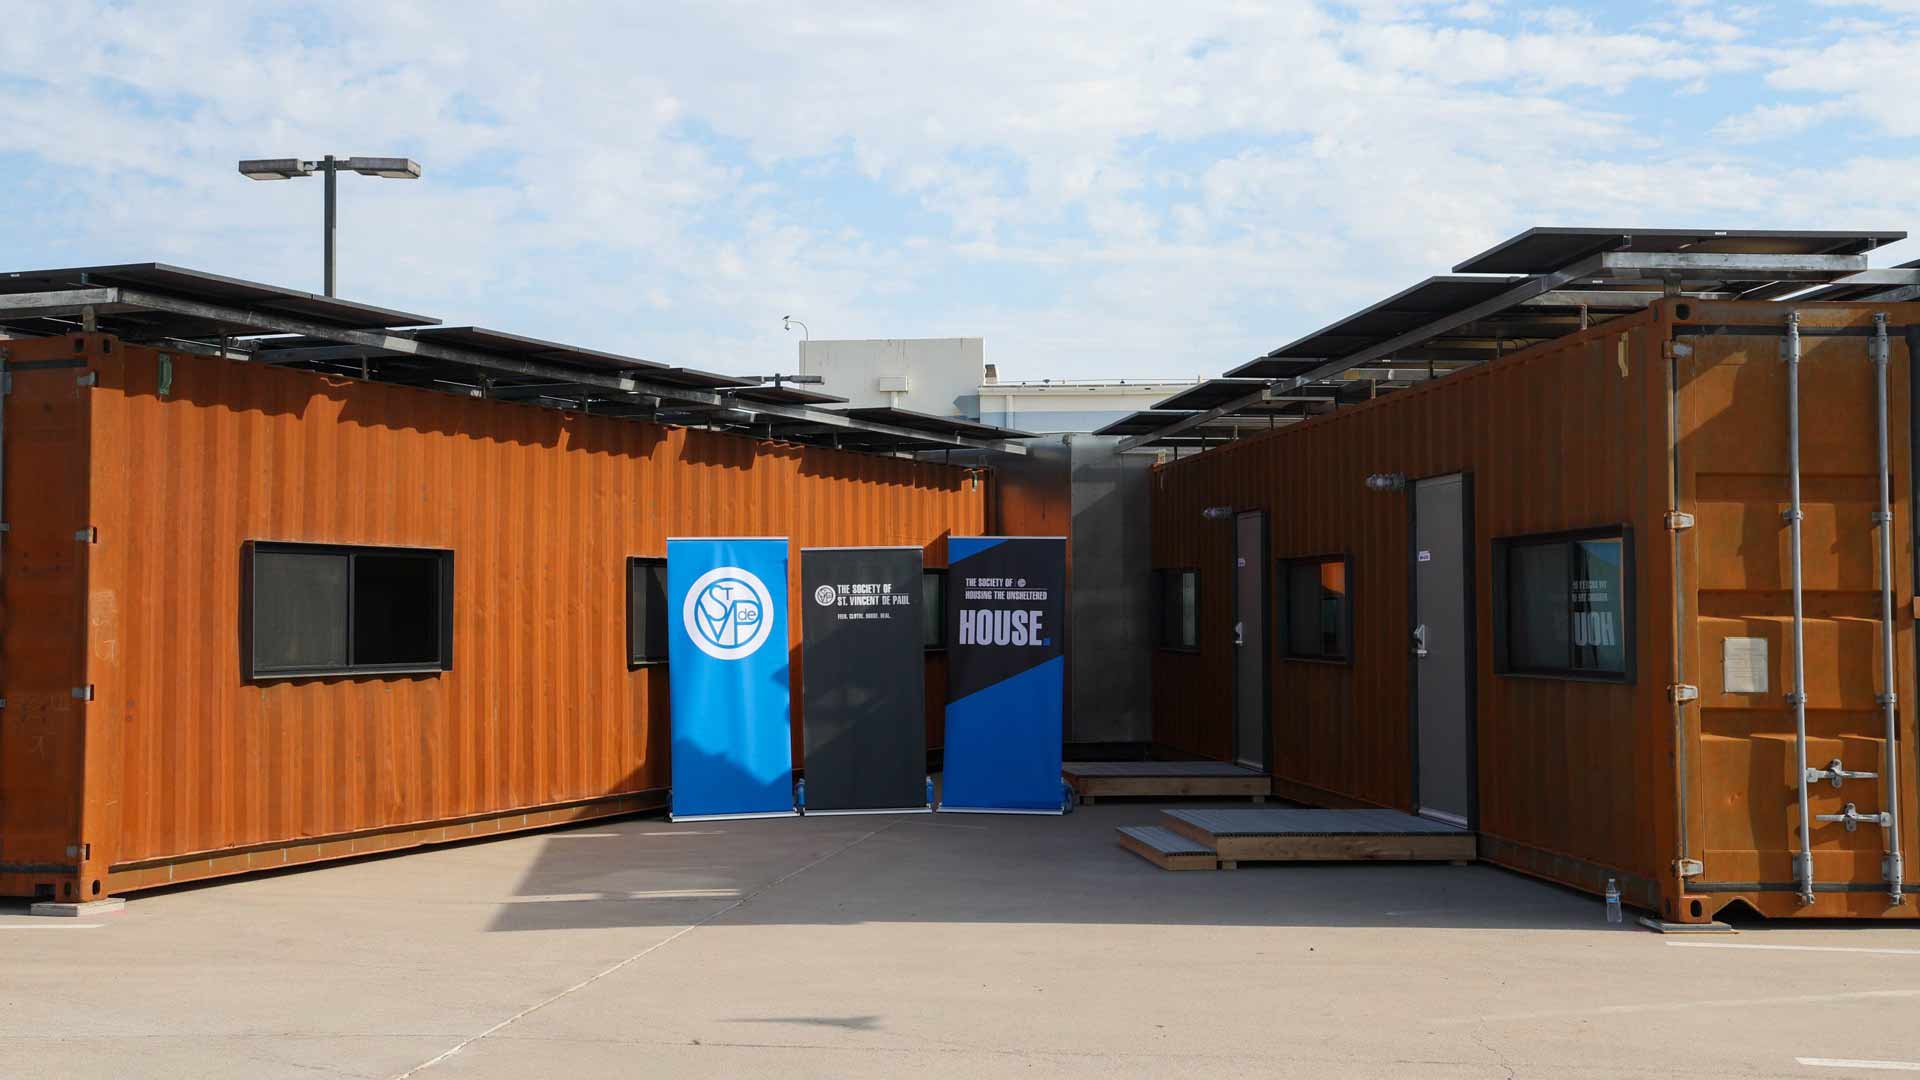 The city of Phoenix has teamed up with the nonprofit St. Vincent de Paul and metal fabrication company Steel + Spark to provide another shelter option using shipping containers. 
